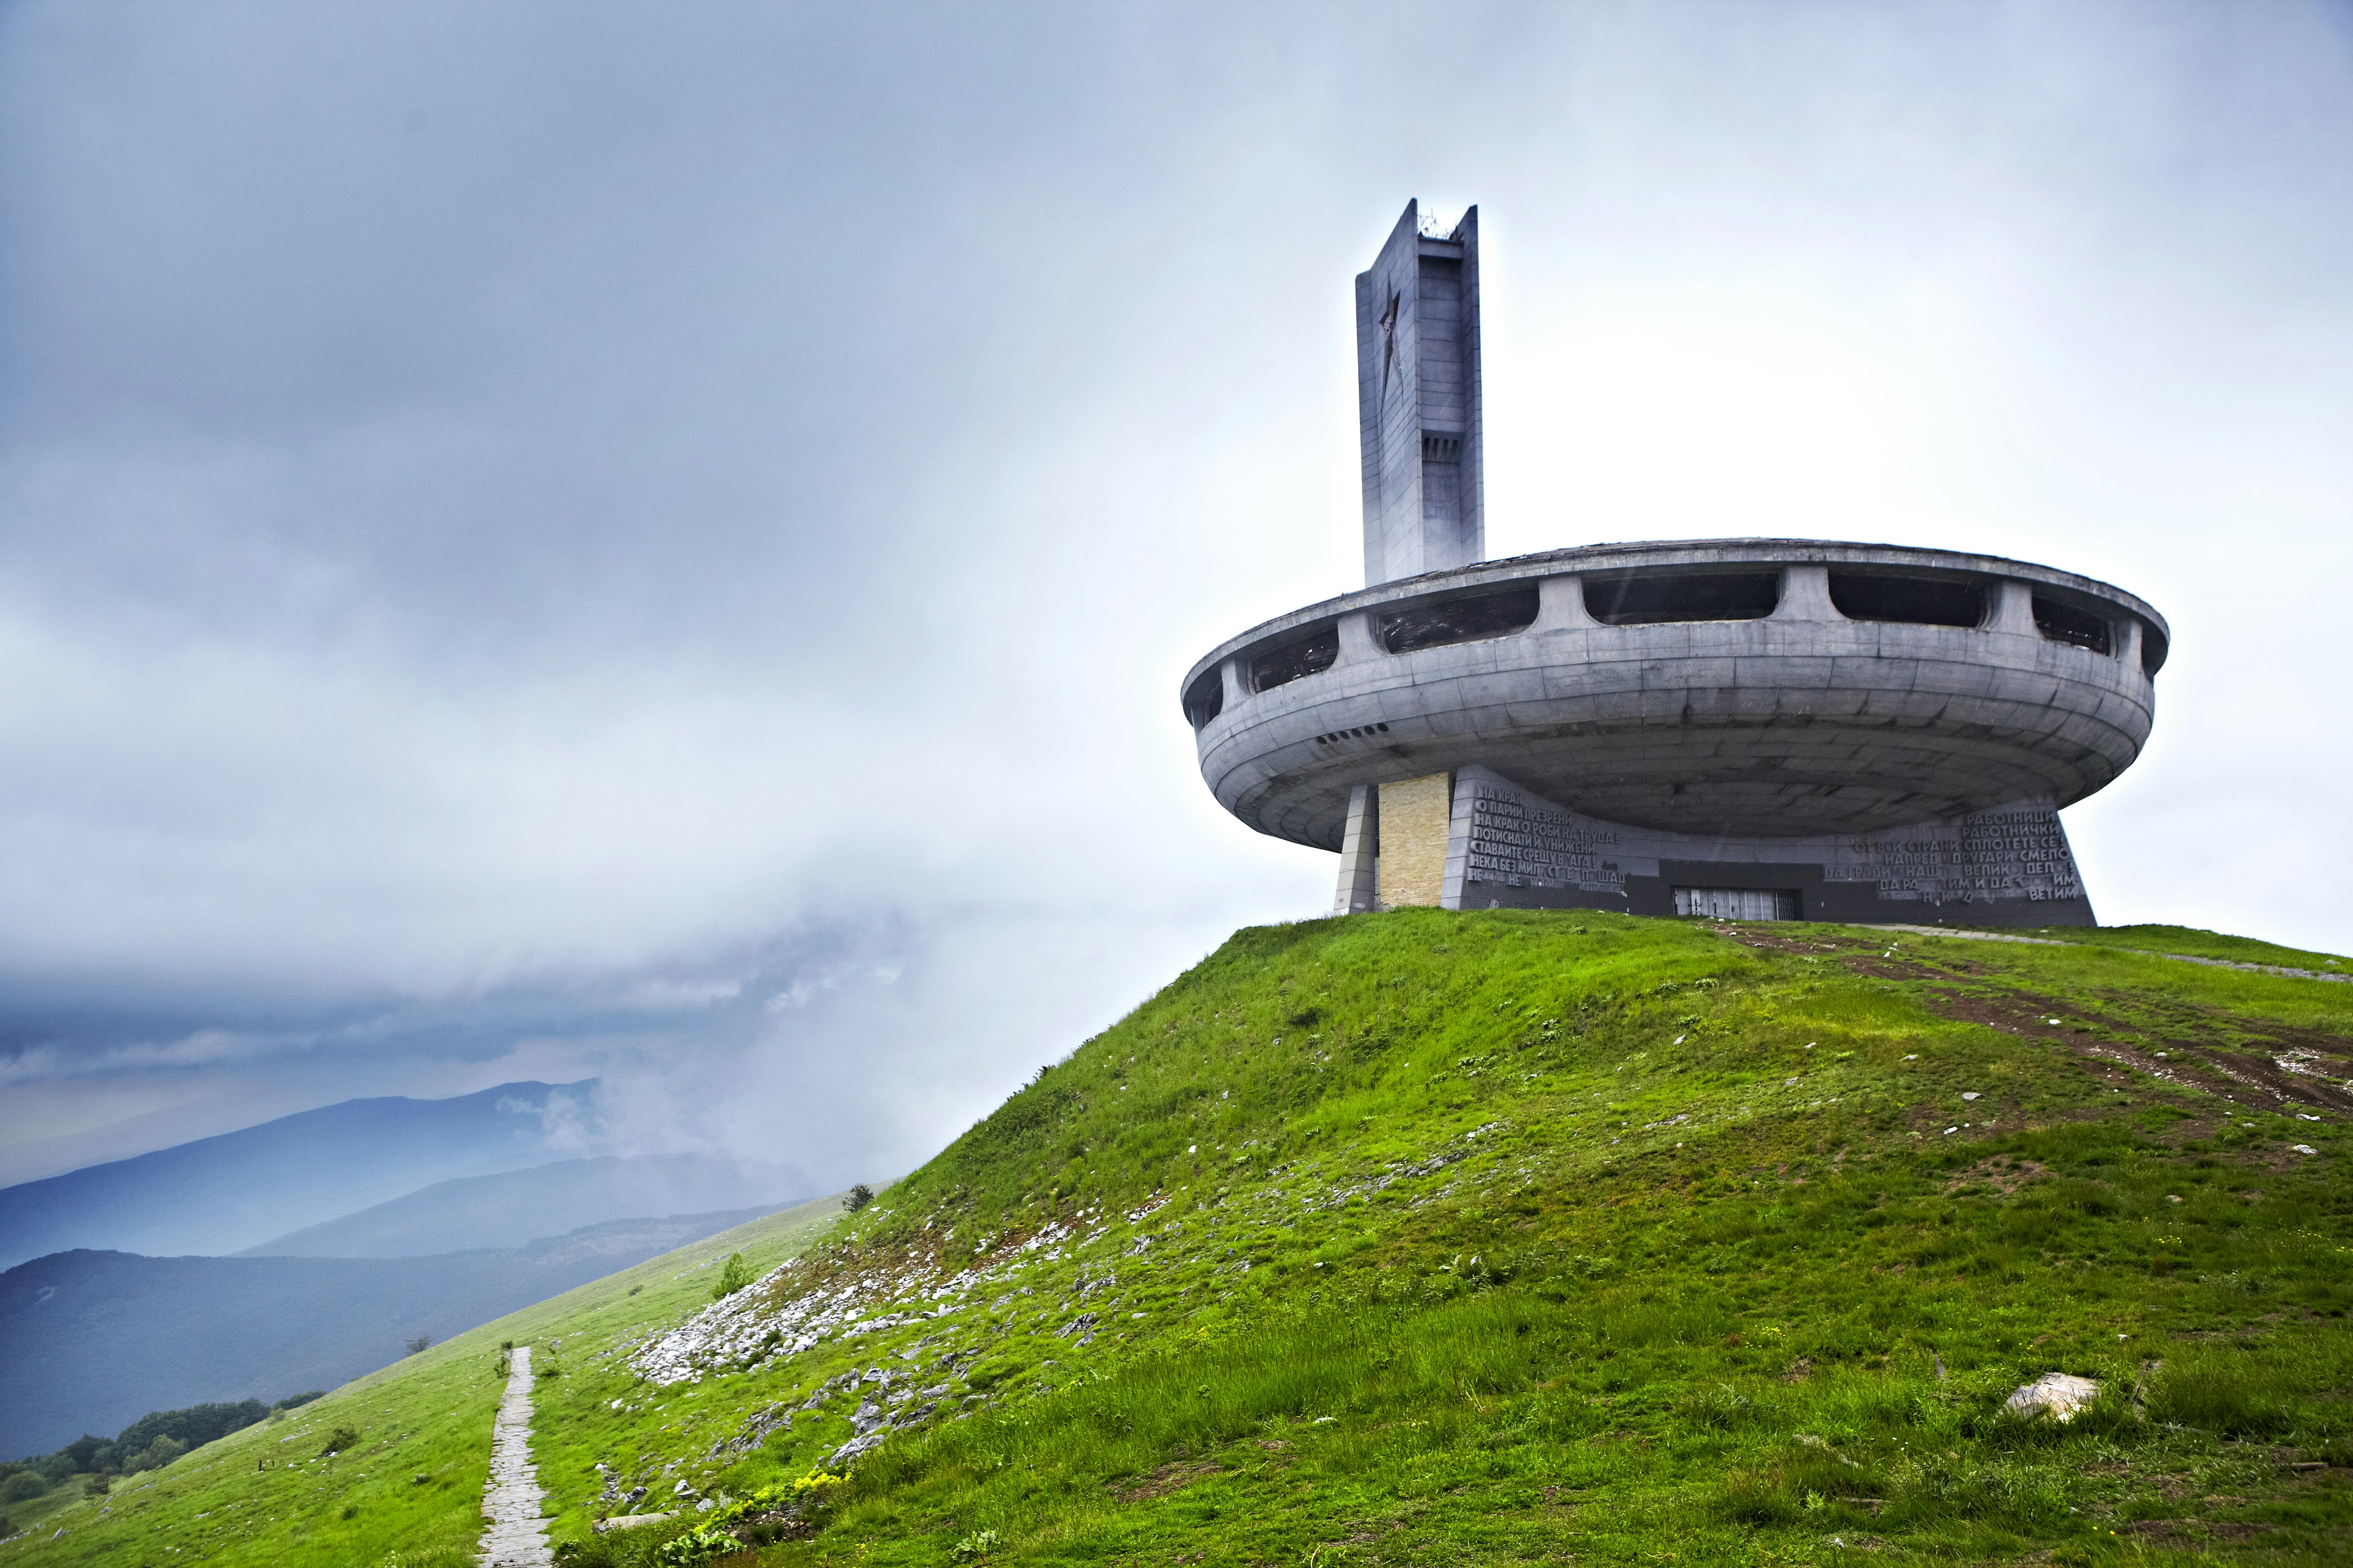 Looking much like an alien flying saucer, the concrete disc of the Buzludzha Monument stands on a grassy hill.